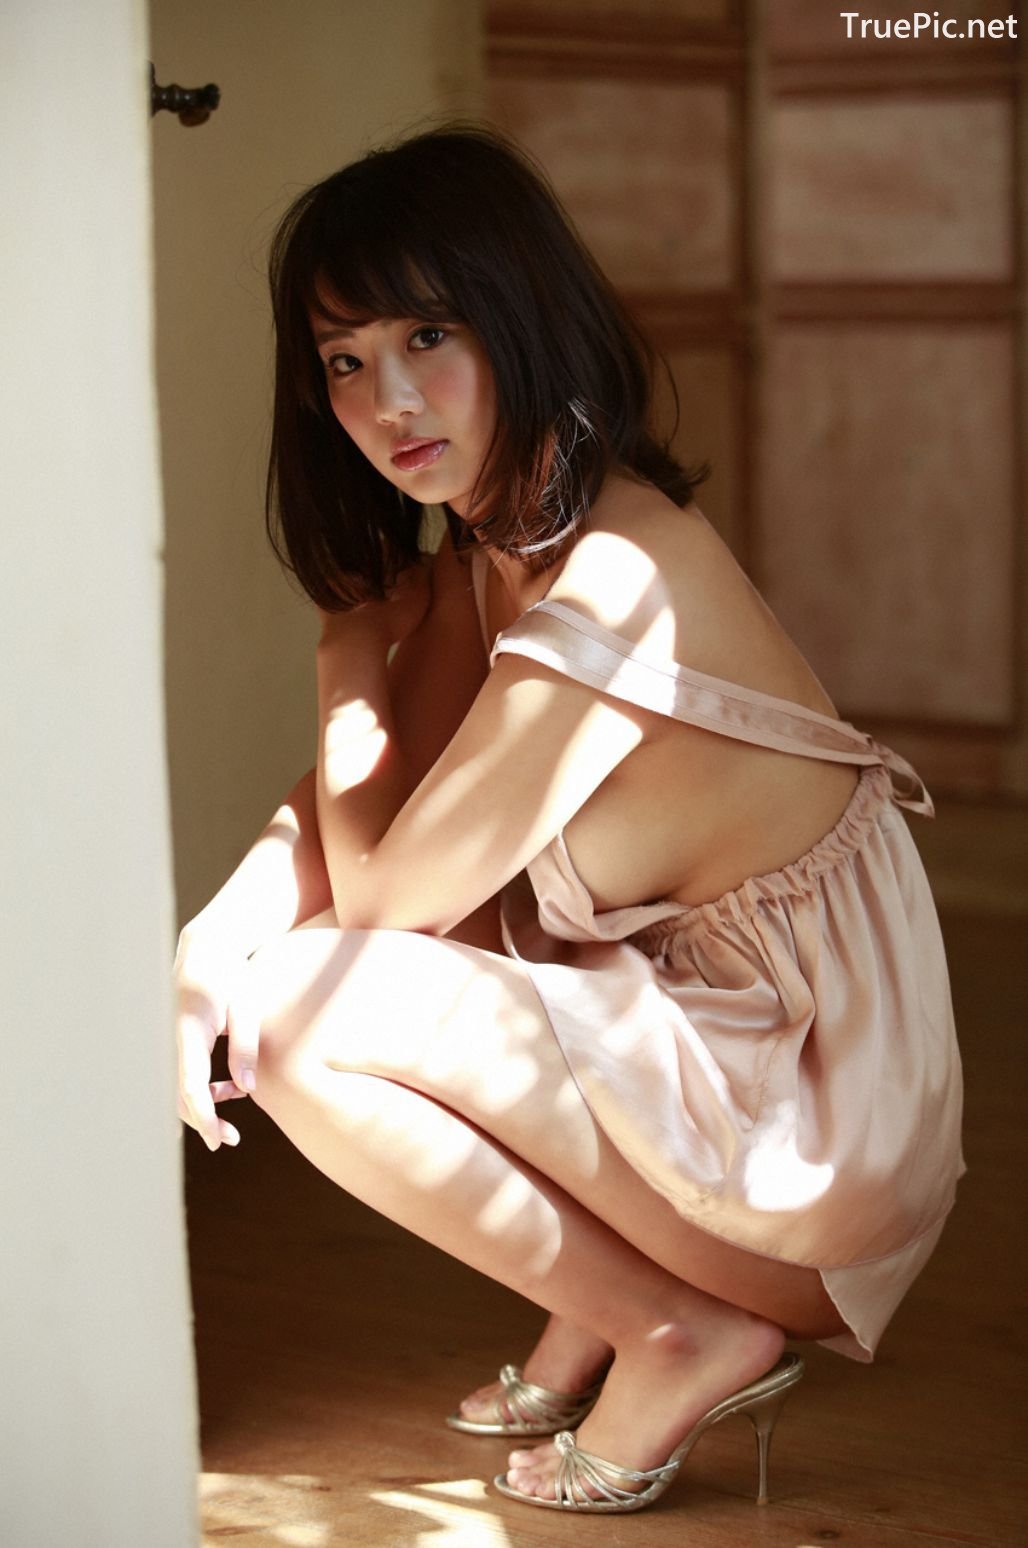 Image-Japanese-Actress-And-Model-Natsumi-Hirajima-Sexy-Lingerie-Queen-TruePic.net- Picture-32